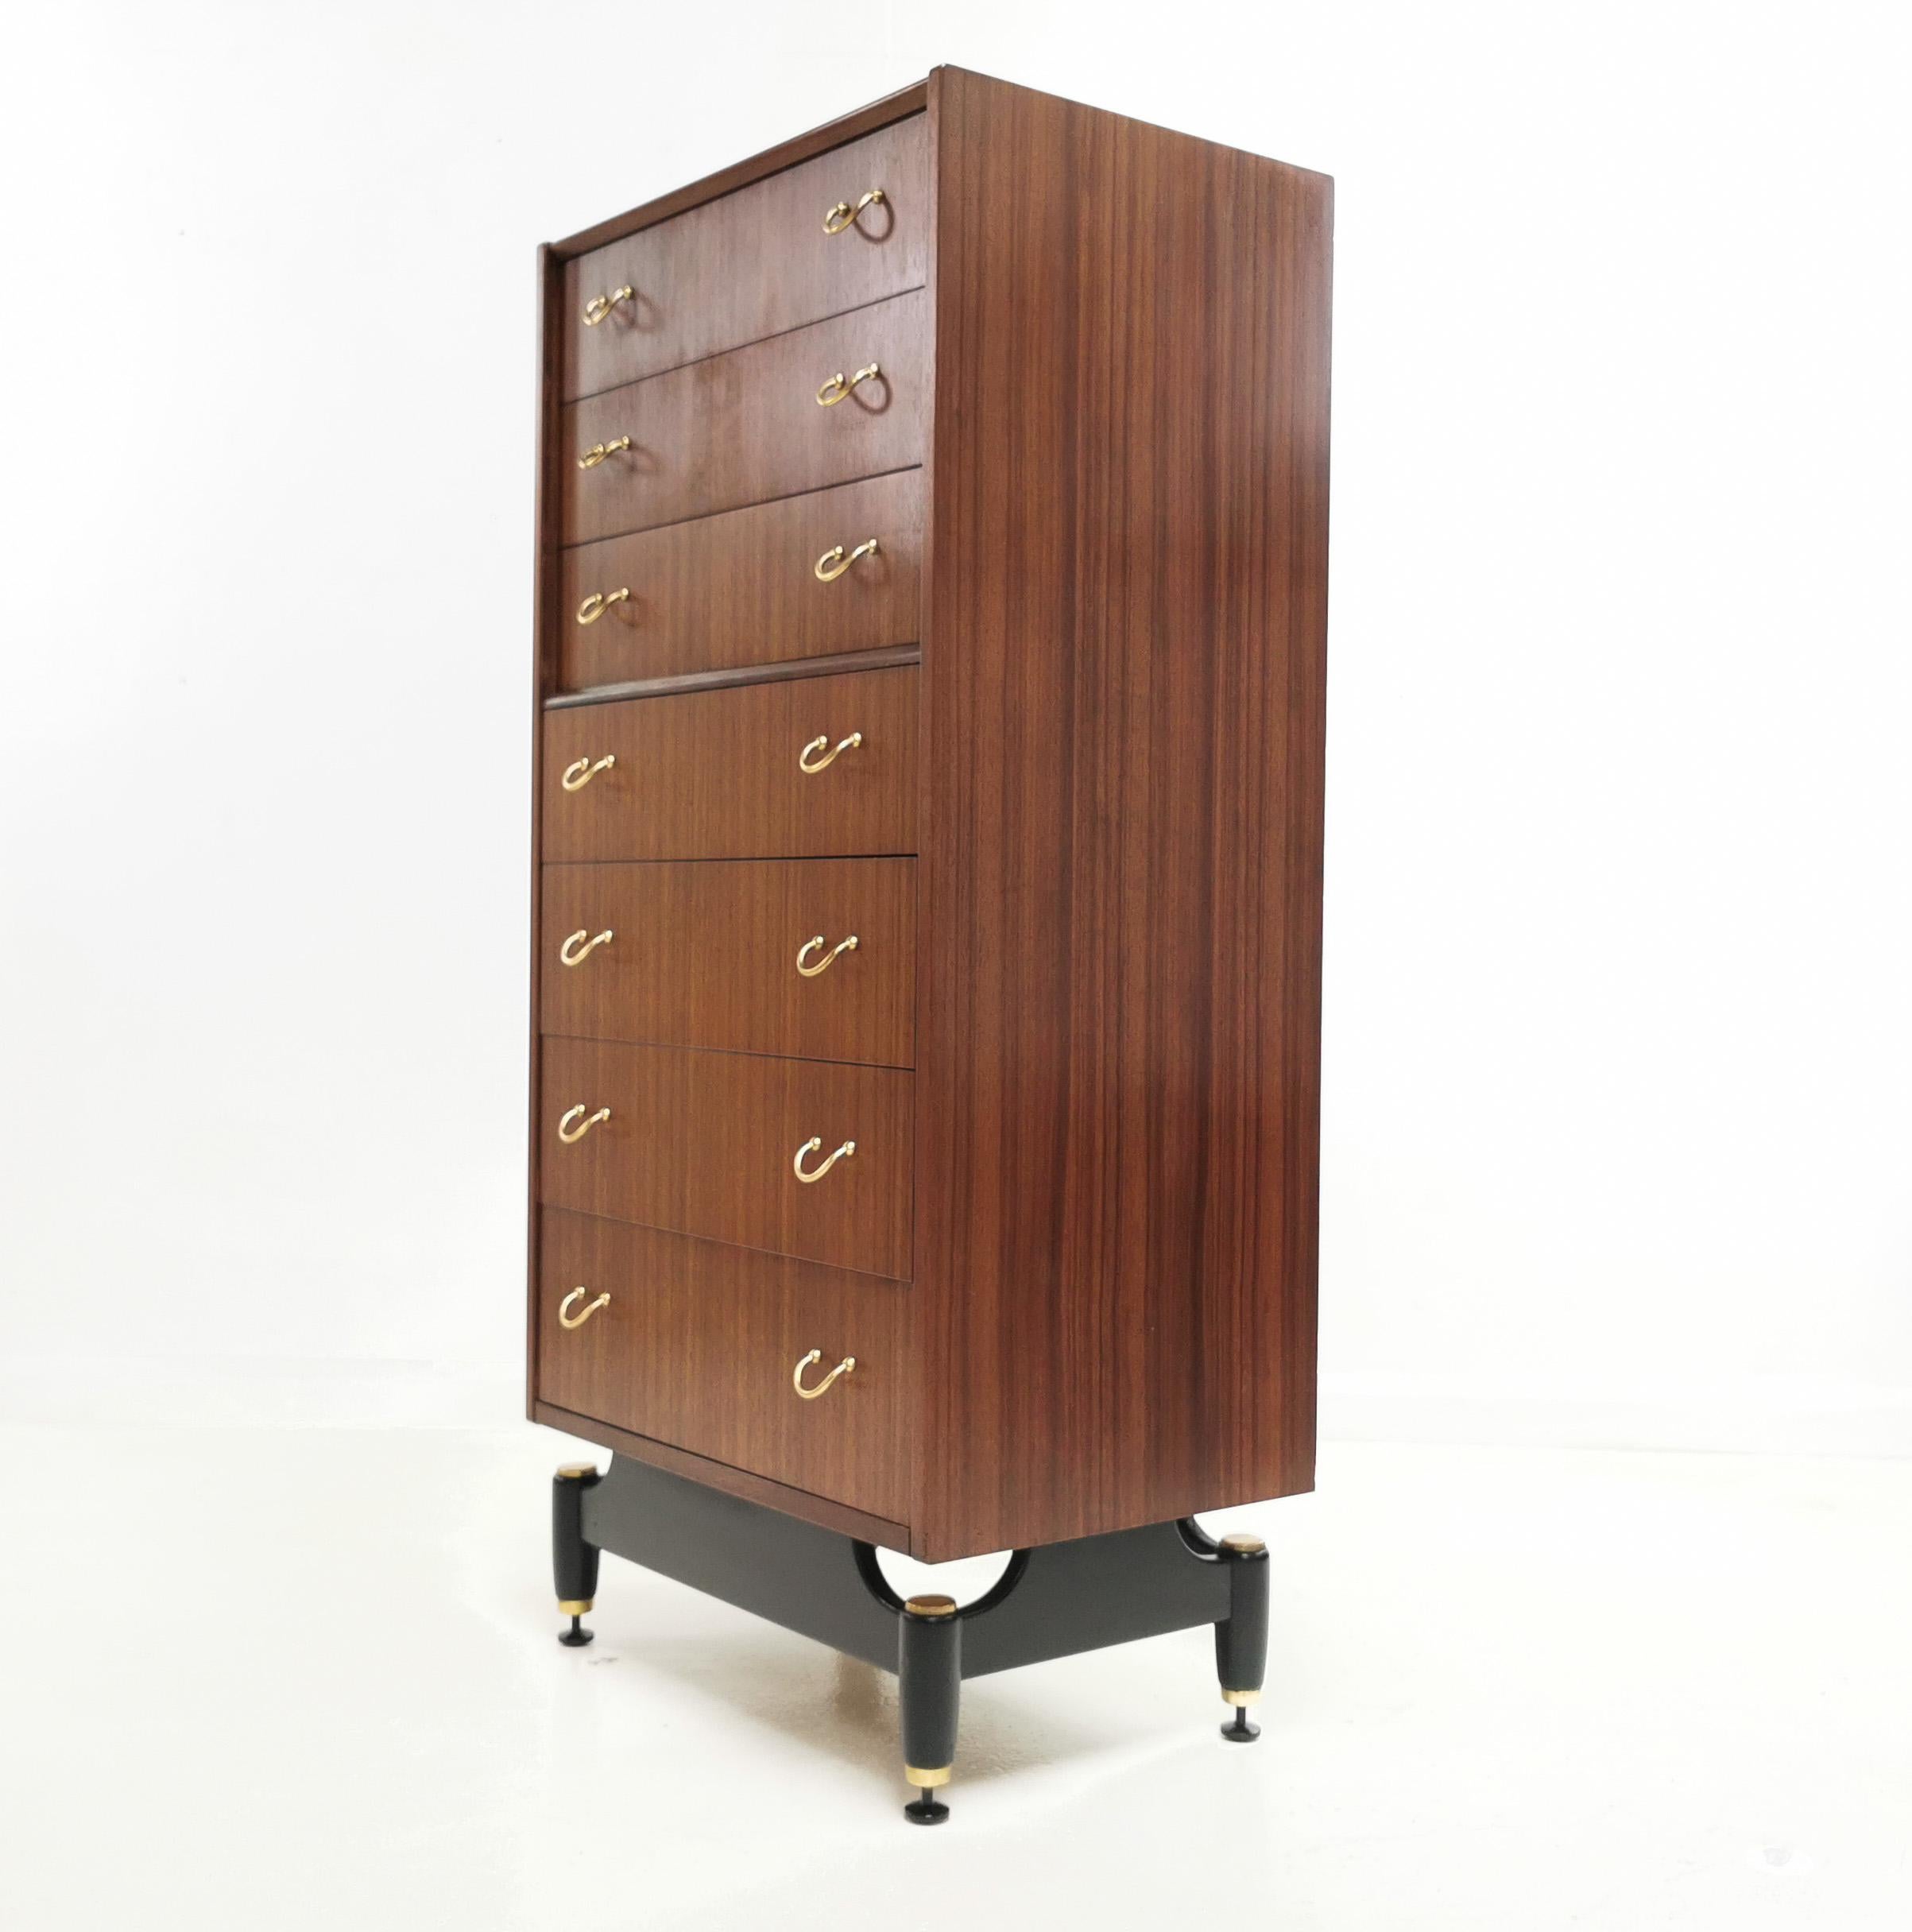 G Plan teak chest of drawers

G Plan teak tall boy chest of drawers from the 1960s. 

Graduated chest of drawers raised on an ebonized base with brass cup feet with original brass drawer pulls. 

Manufactured by Ernest Gomme, G Plan as part of